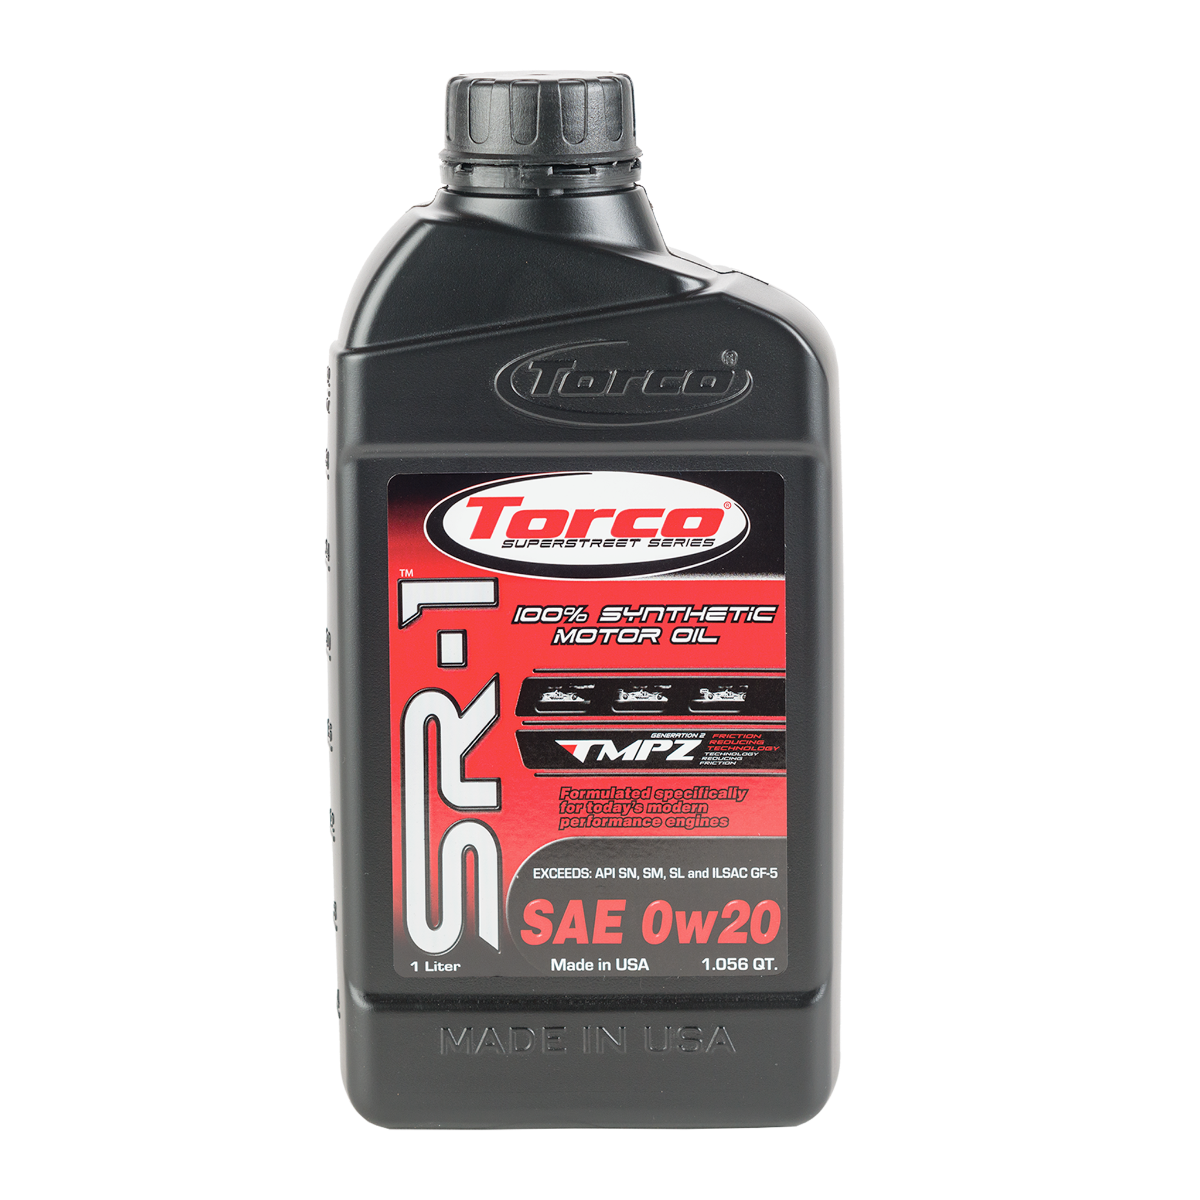 Torco A160530CE - SR-1 Synthetic Oil 5W30 1 Liter